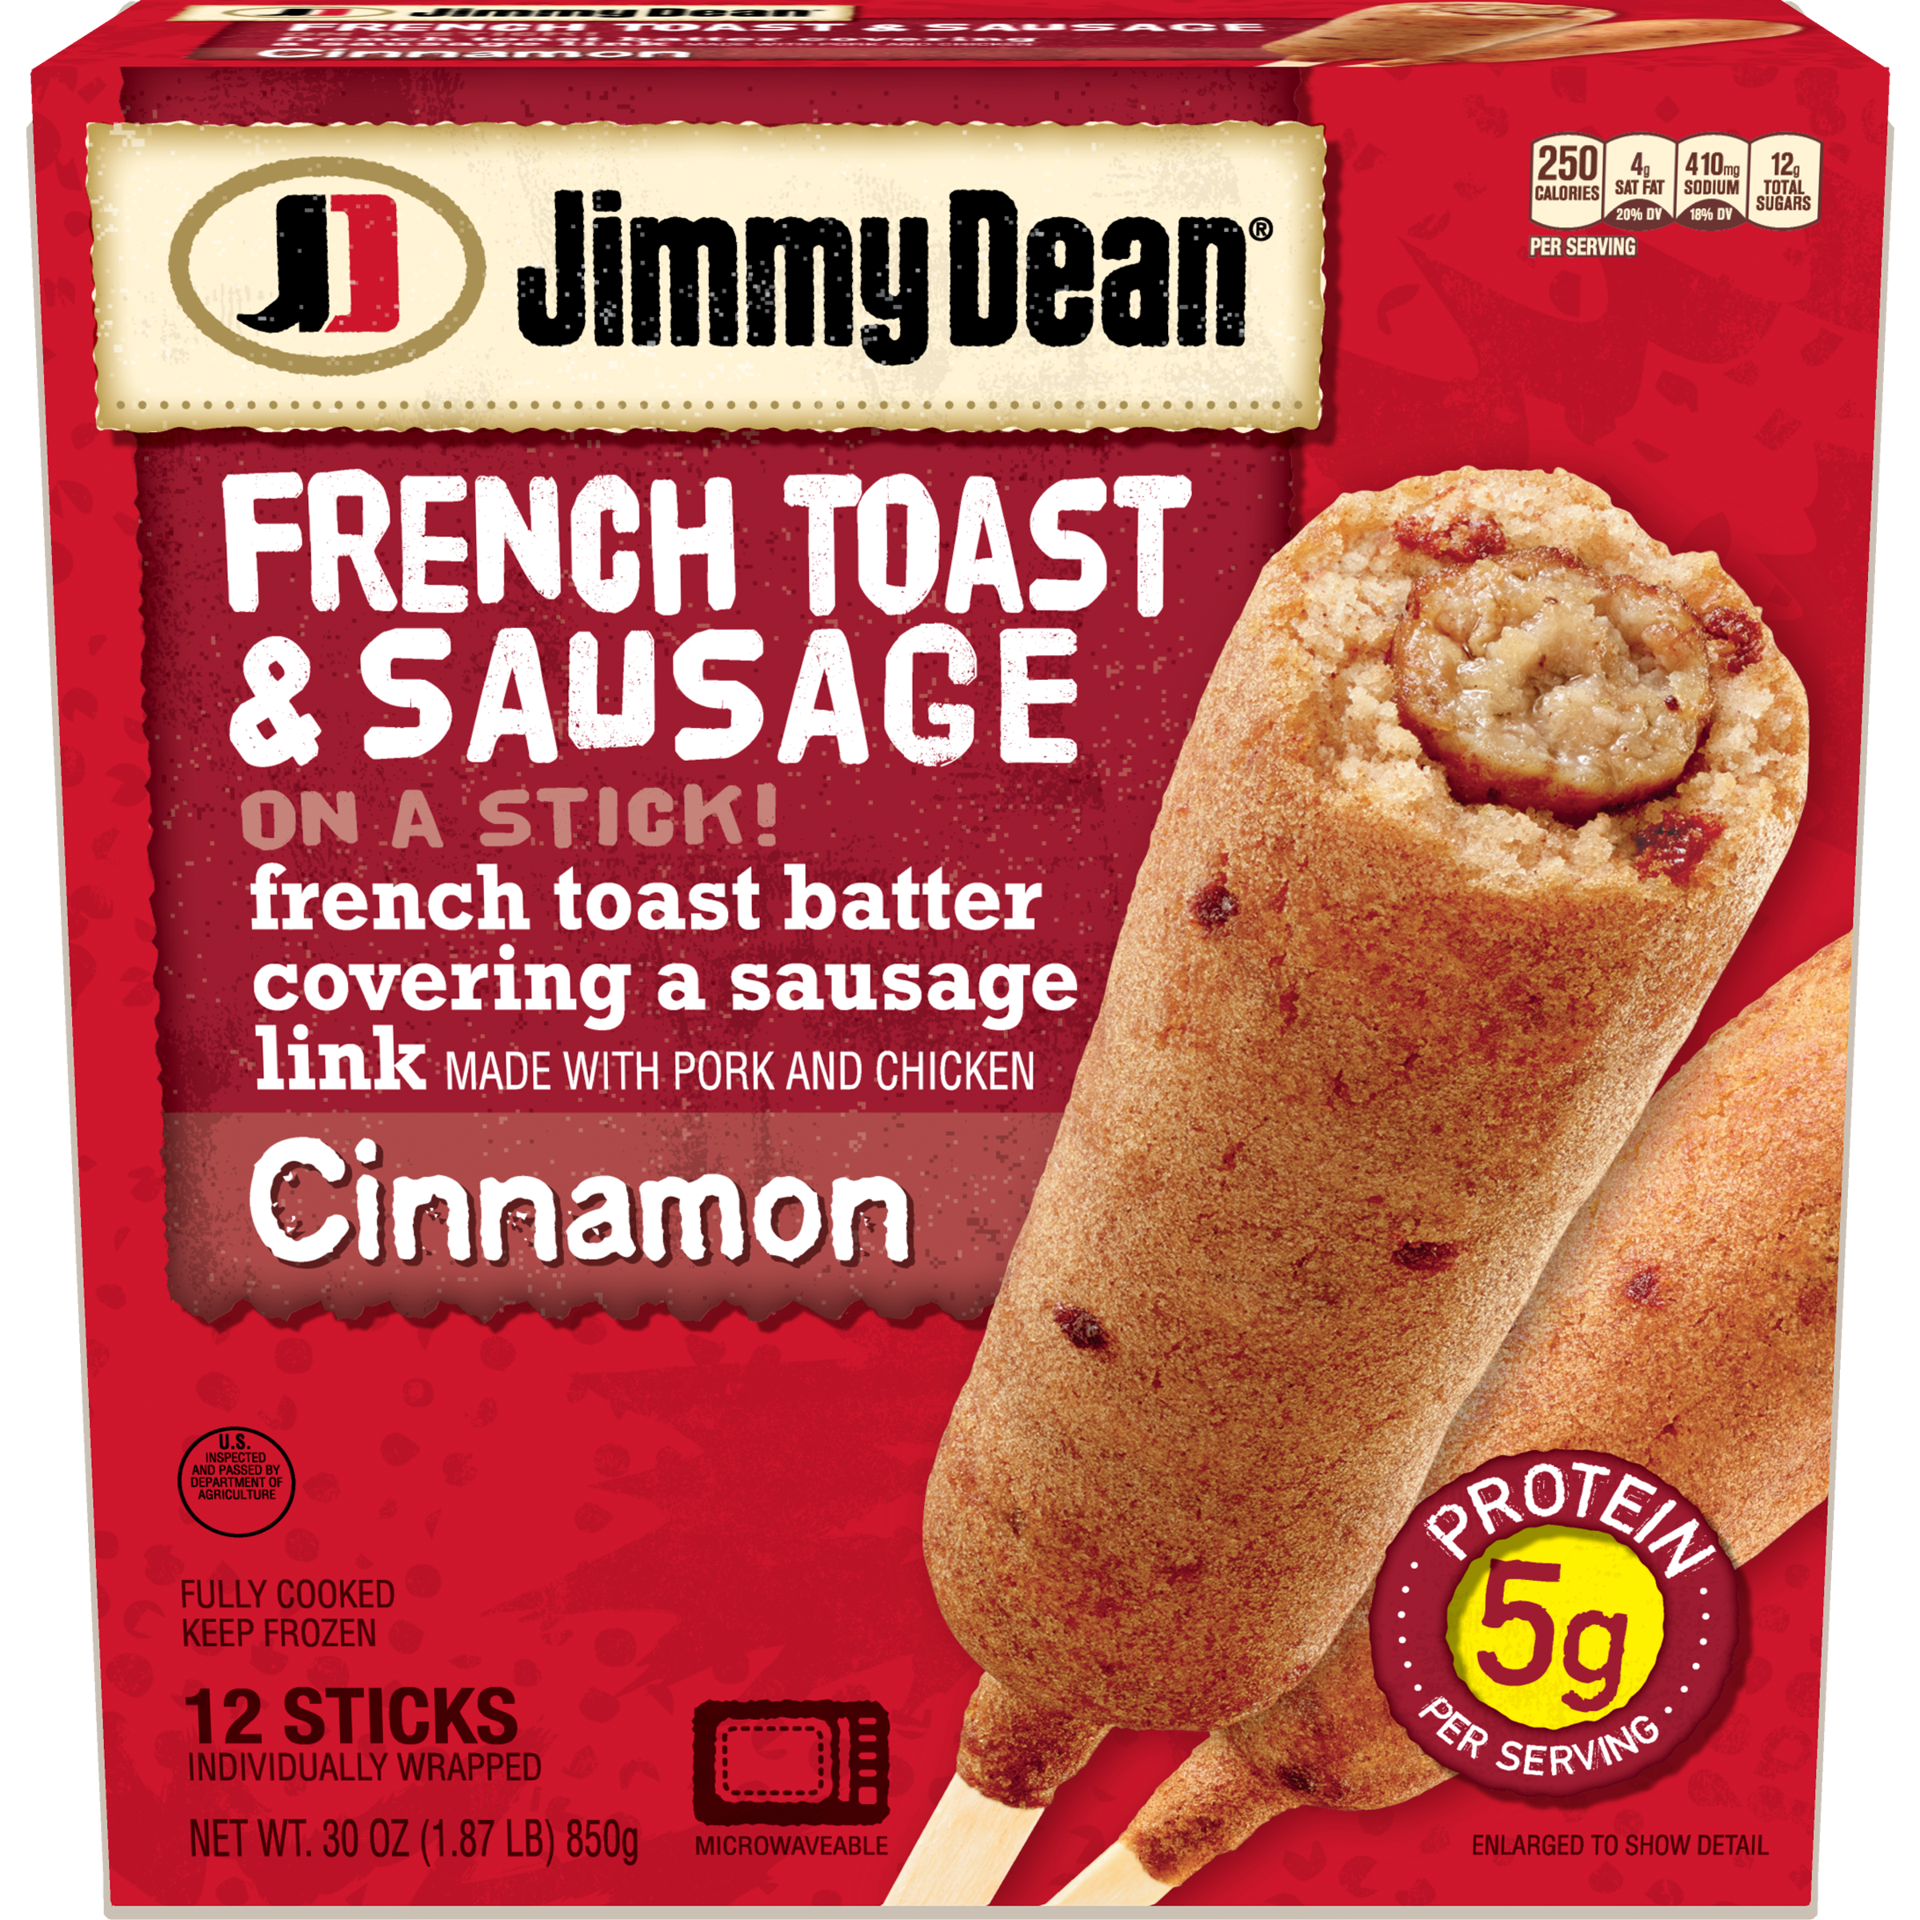 Jimmy Dean Pancake and Sausage on a Stick, 20 ct.